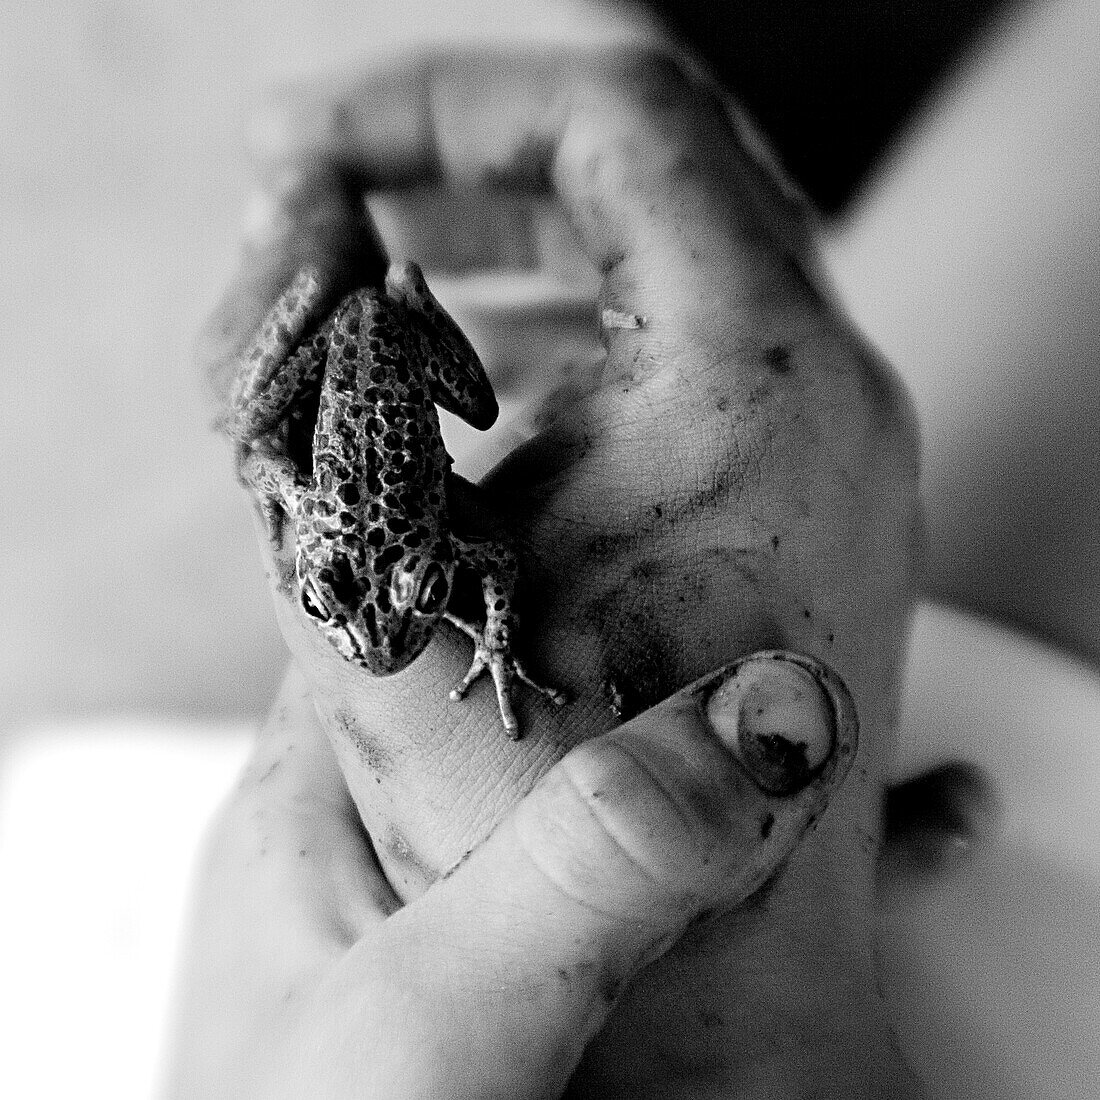 Muddy hands of boy holding a small frog (black and white photo using Lensbaby technique), Borden, Western Australia, Australia